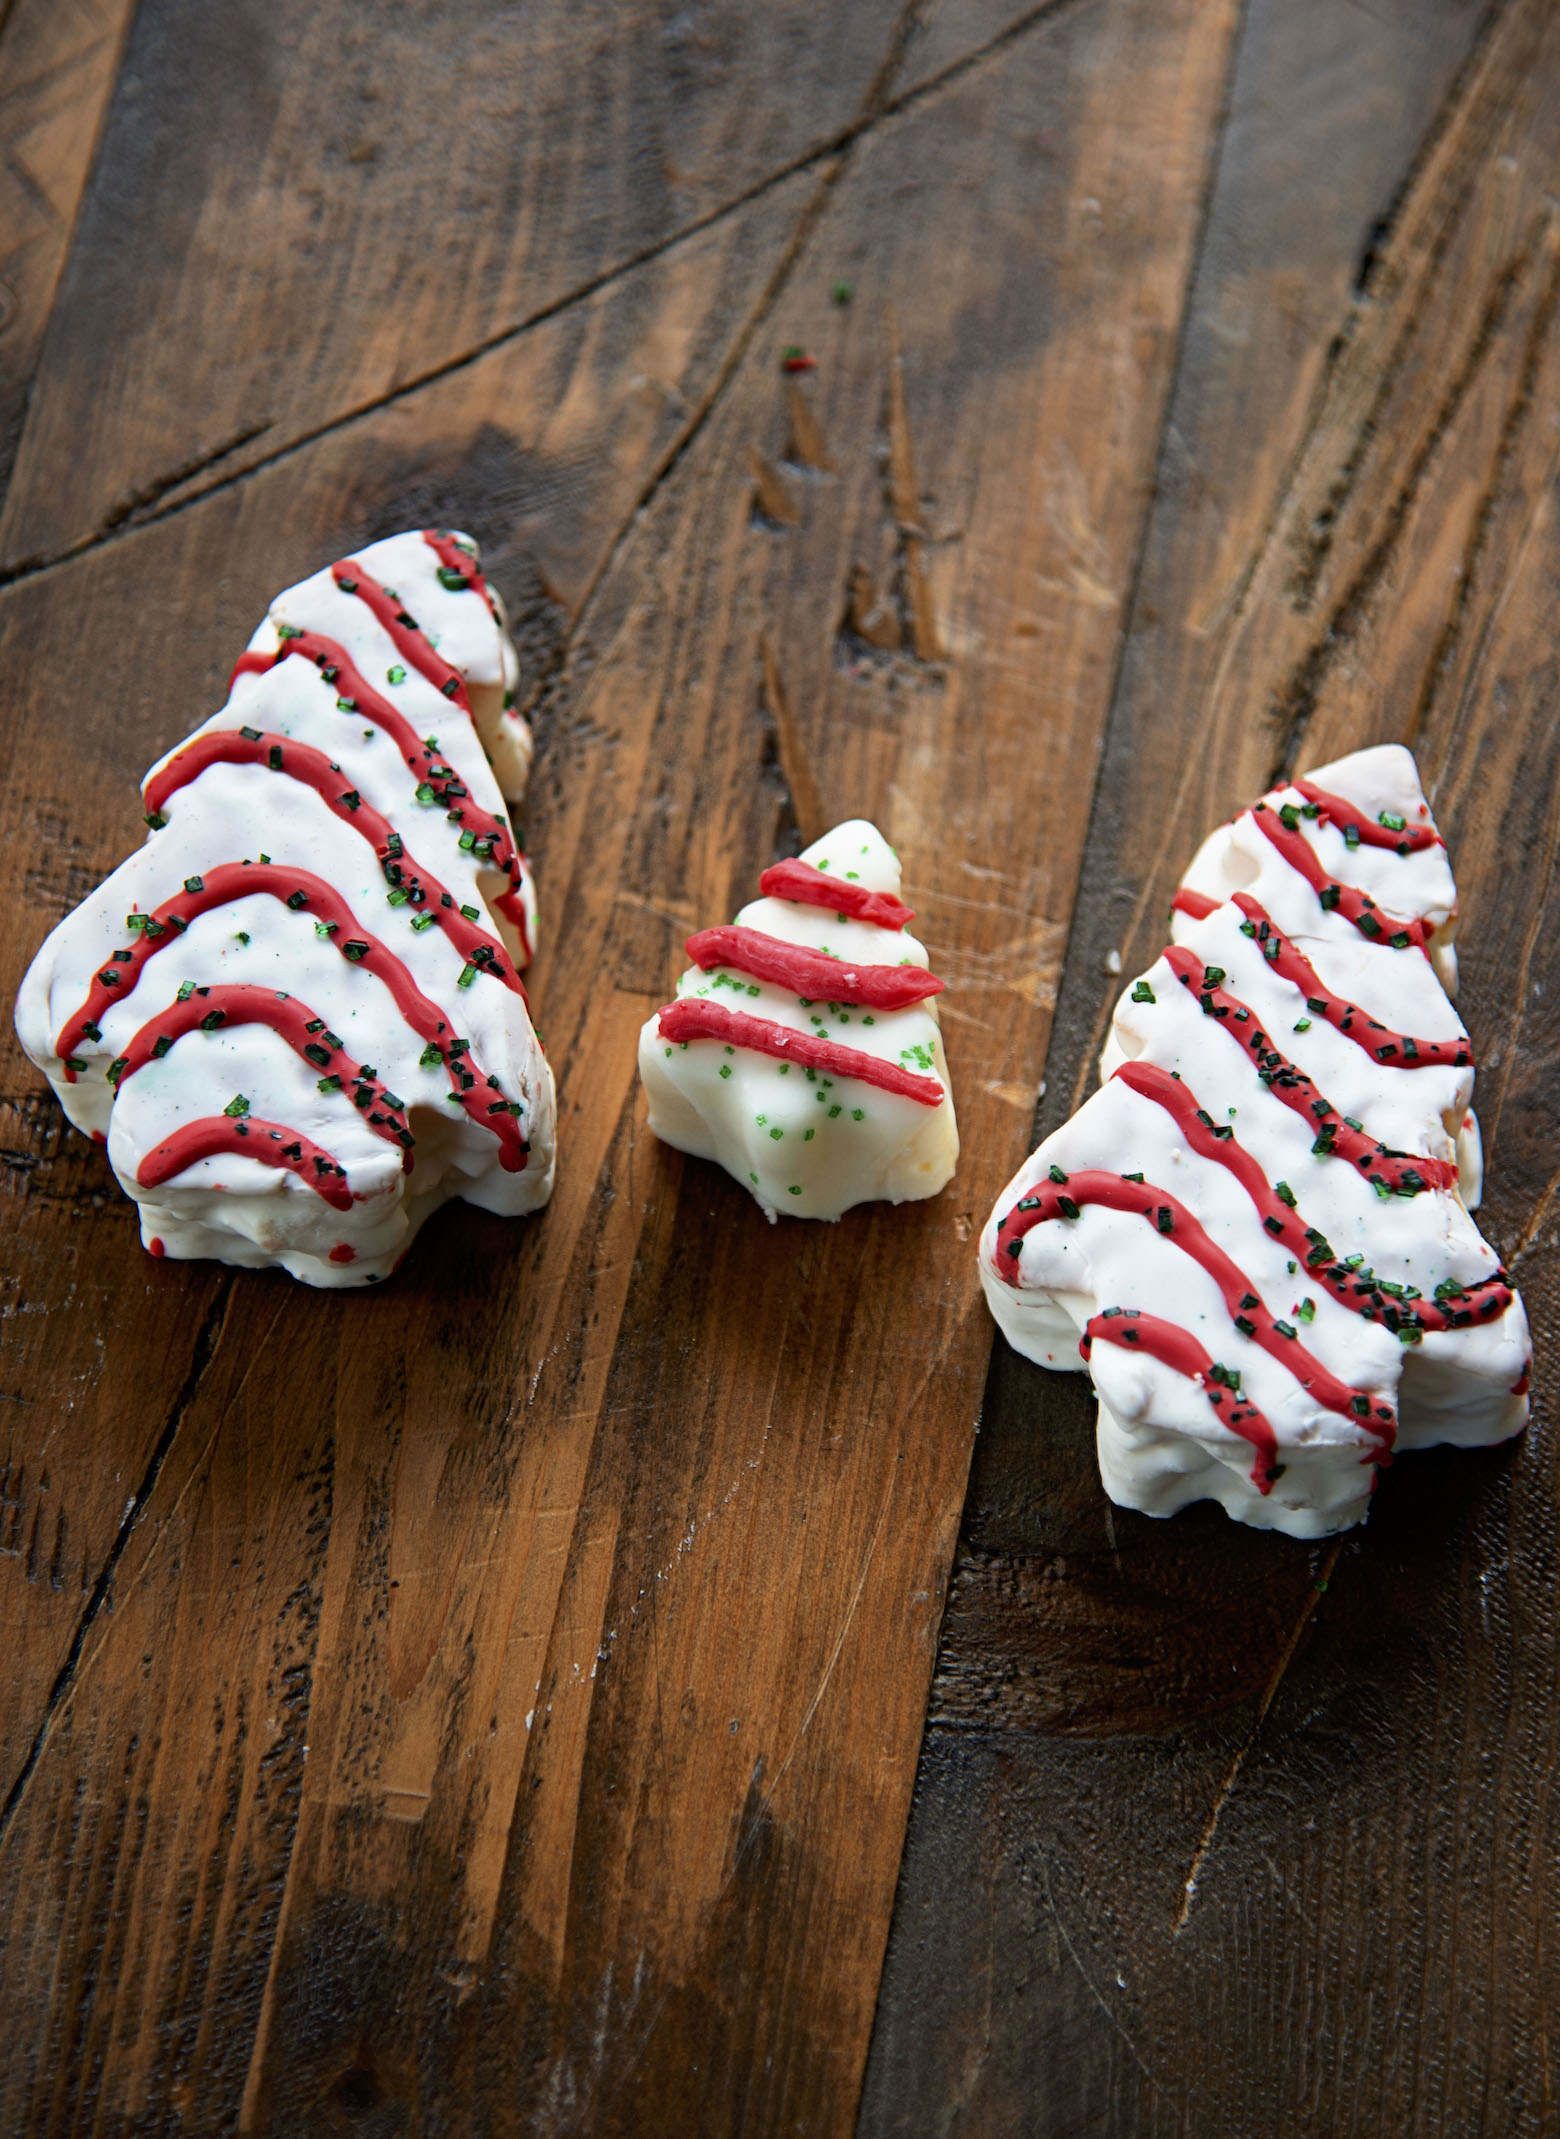 A piece of Christmas Tree Cake Fudge between two Little Debbie Christmas Tree Cakes